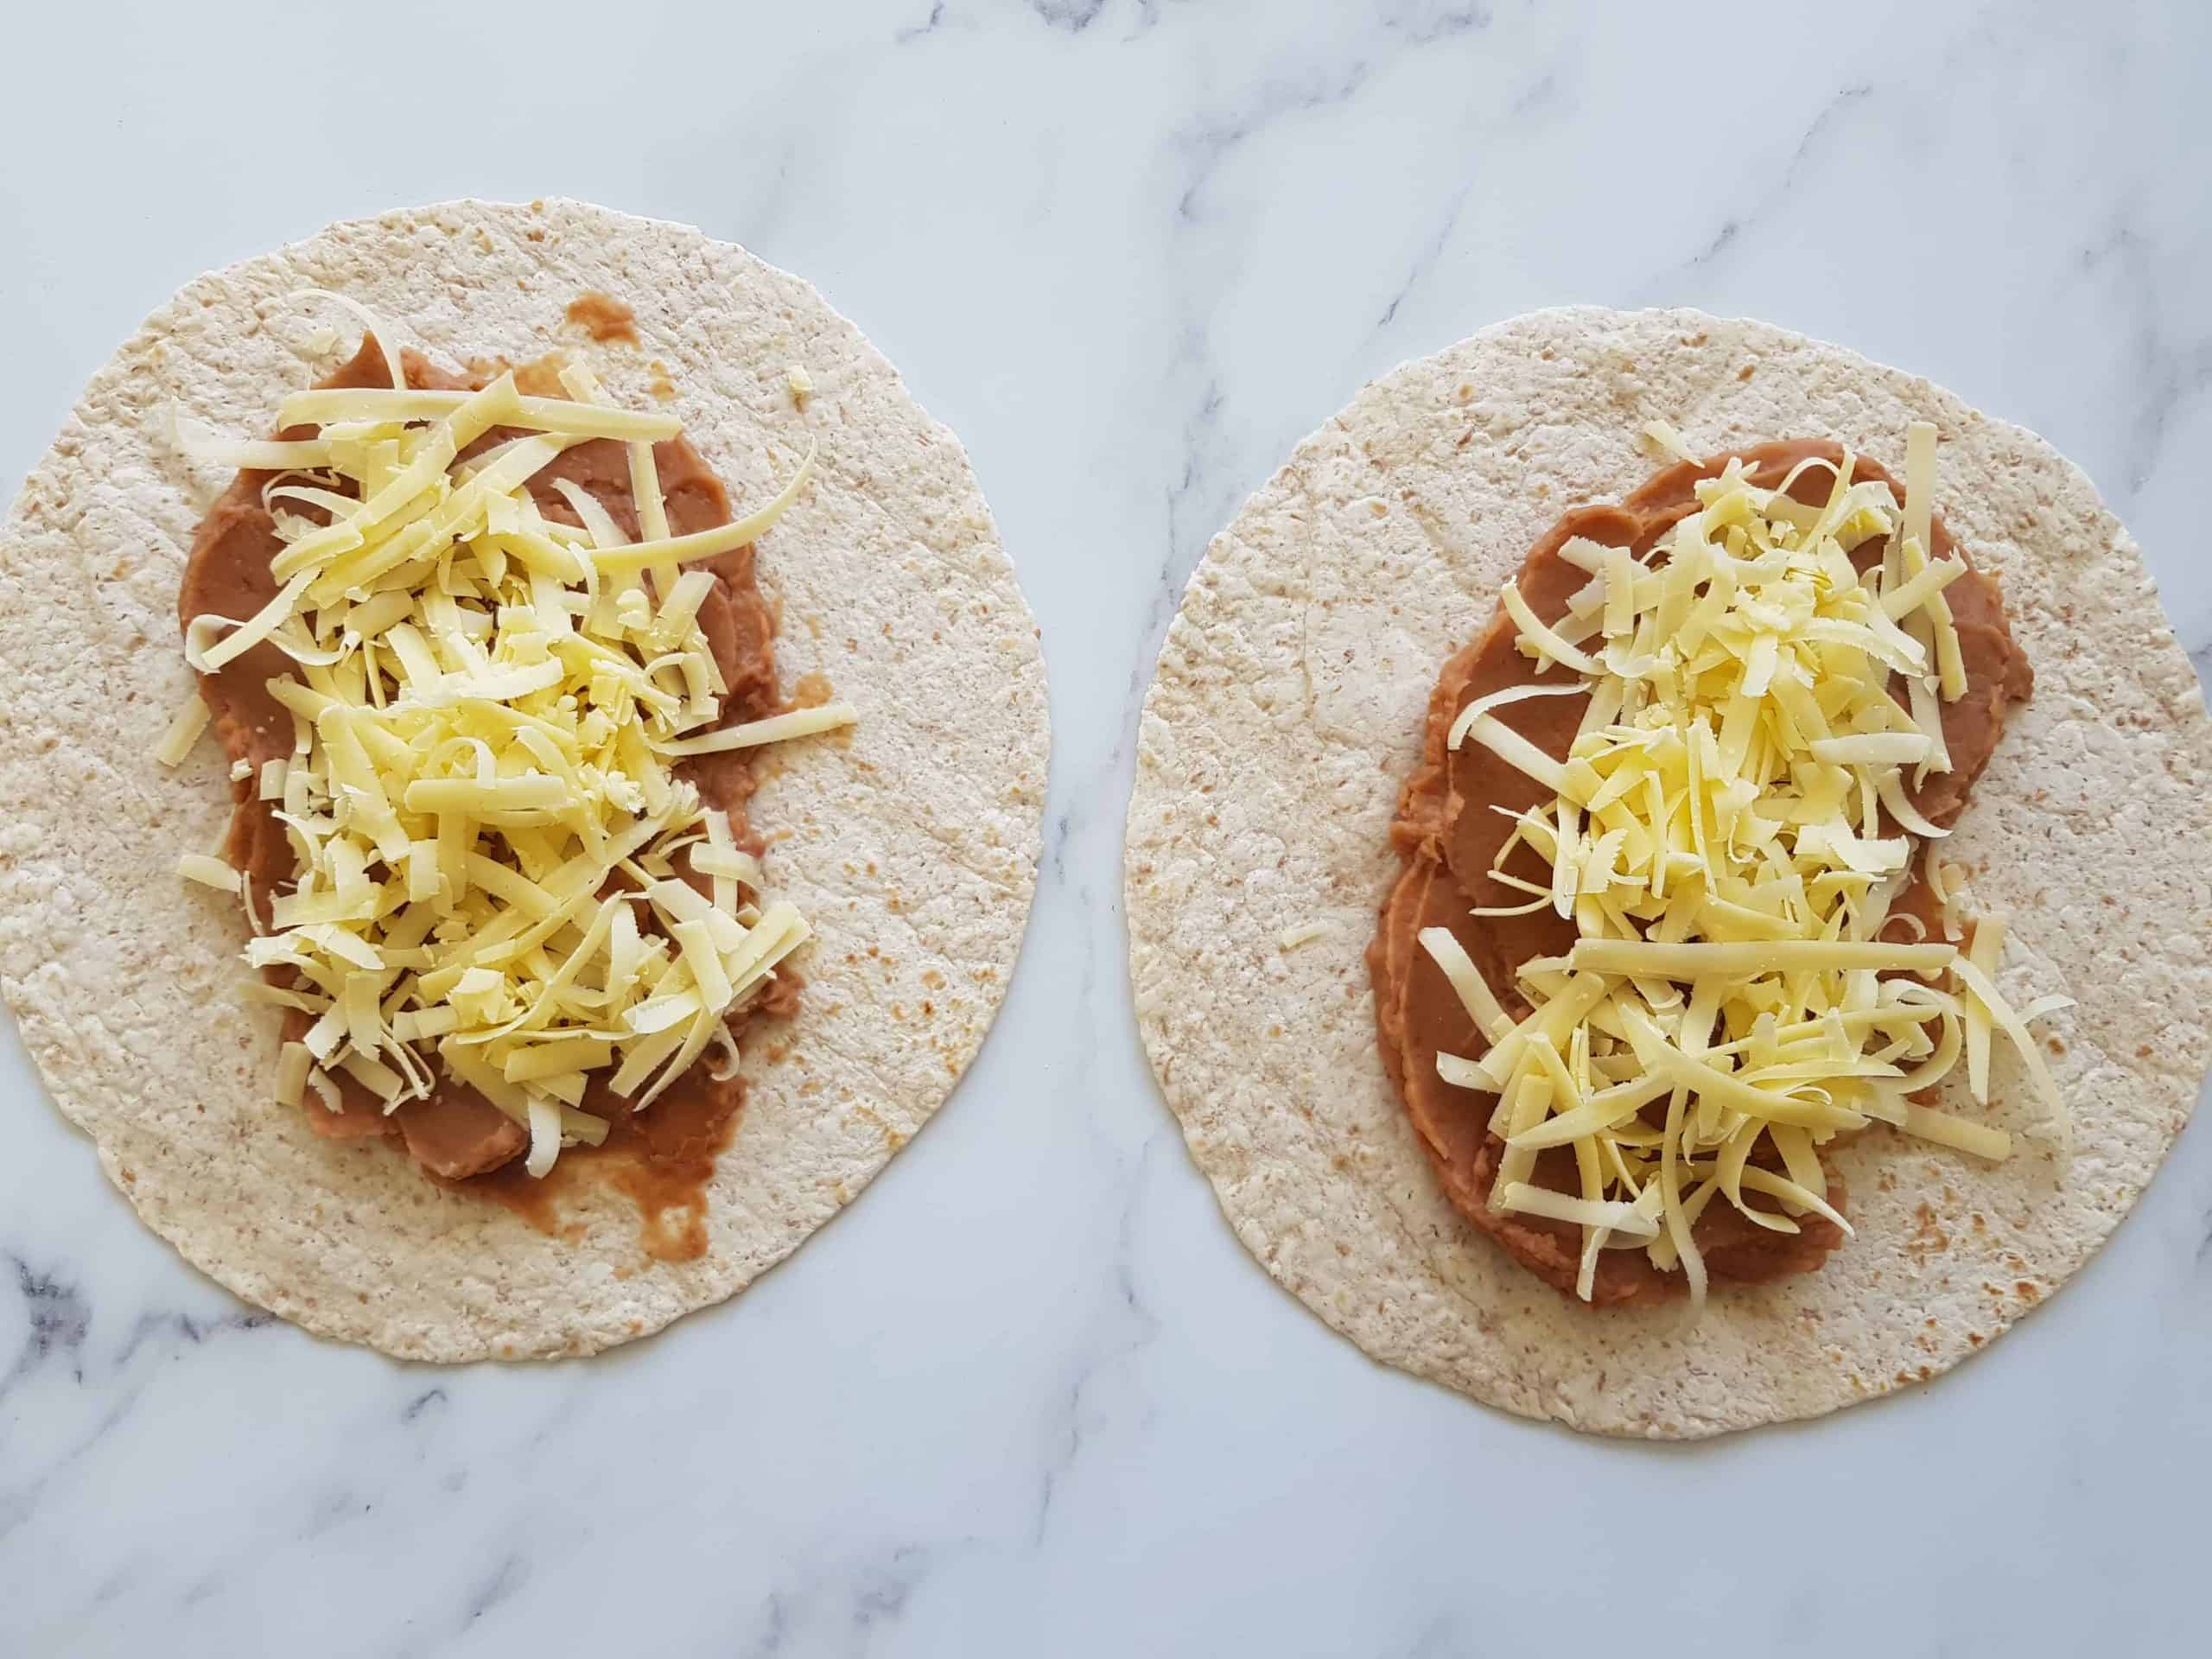 Tortilla wraps with refried beans and grated cheese.